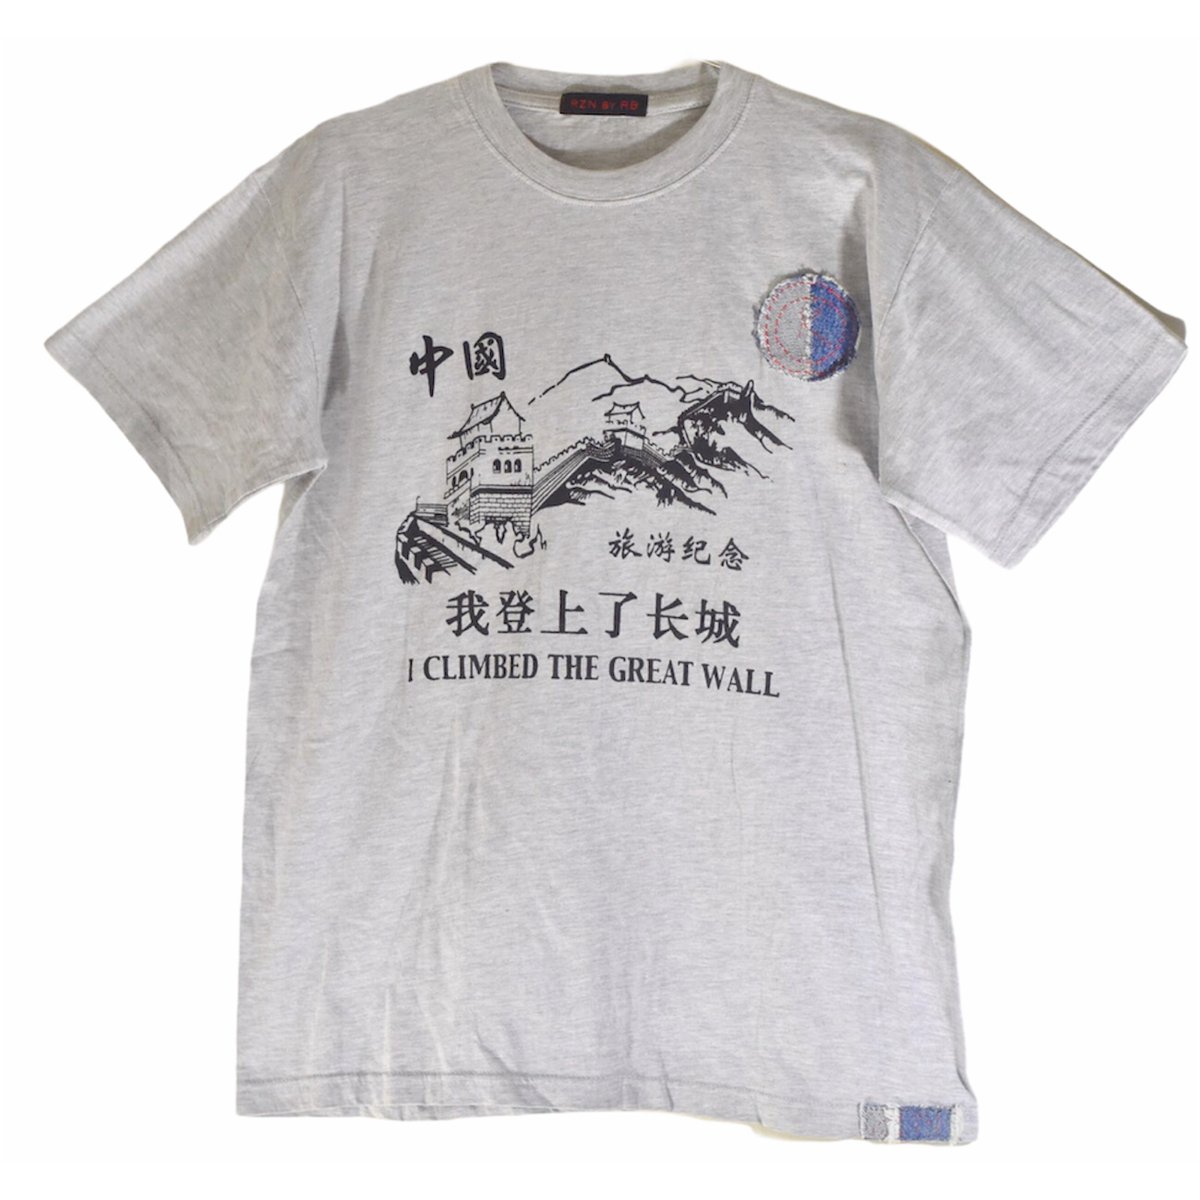 Image of RZN by RB "I Climbed the Great Wall" tee shirt